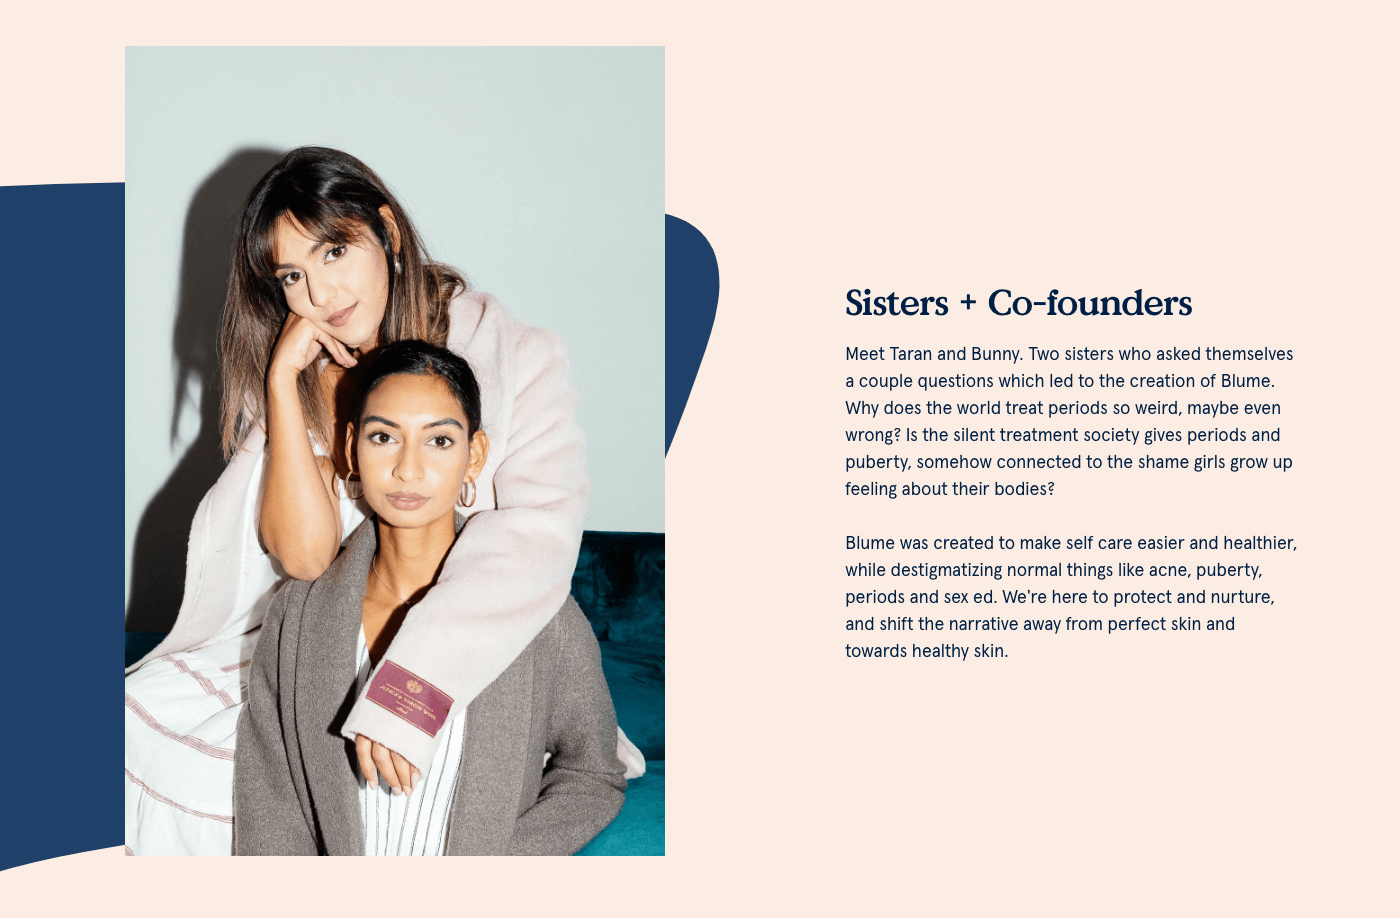 On the Blume About Us page, Taran and Bunny Ghatrora, sisters and co-founders of Blume, lean on each other while smiling at the camera